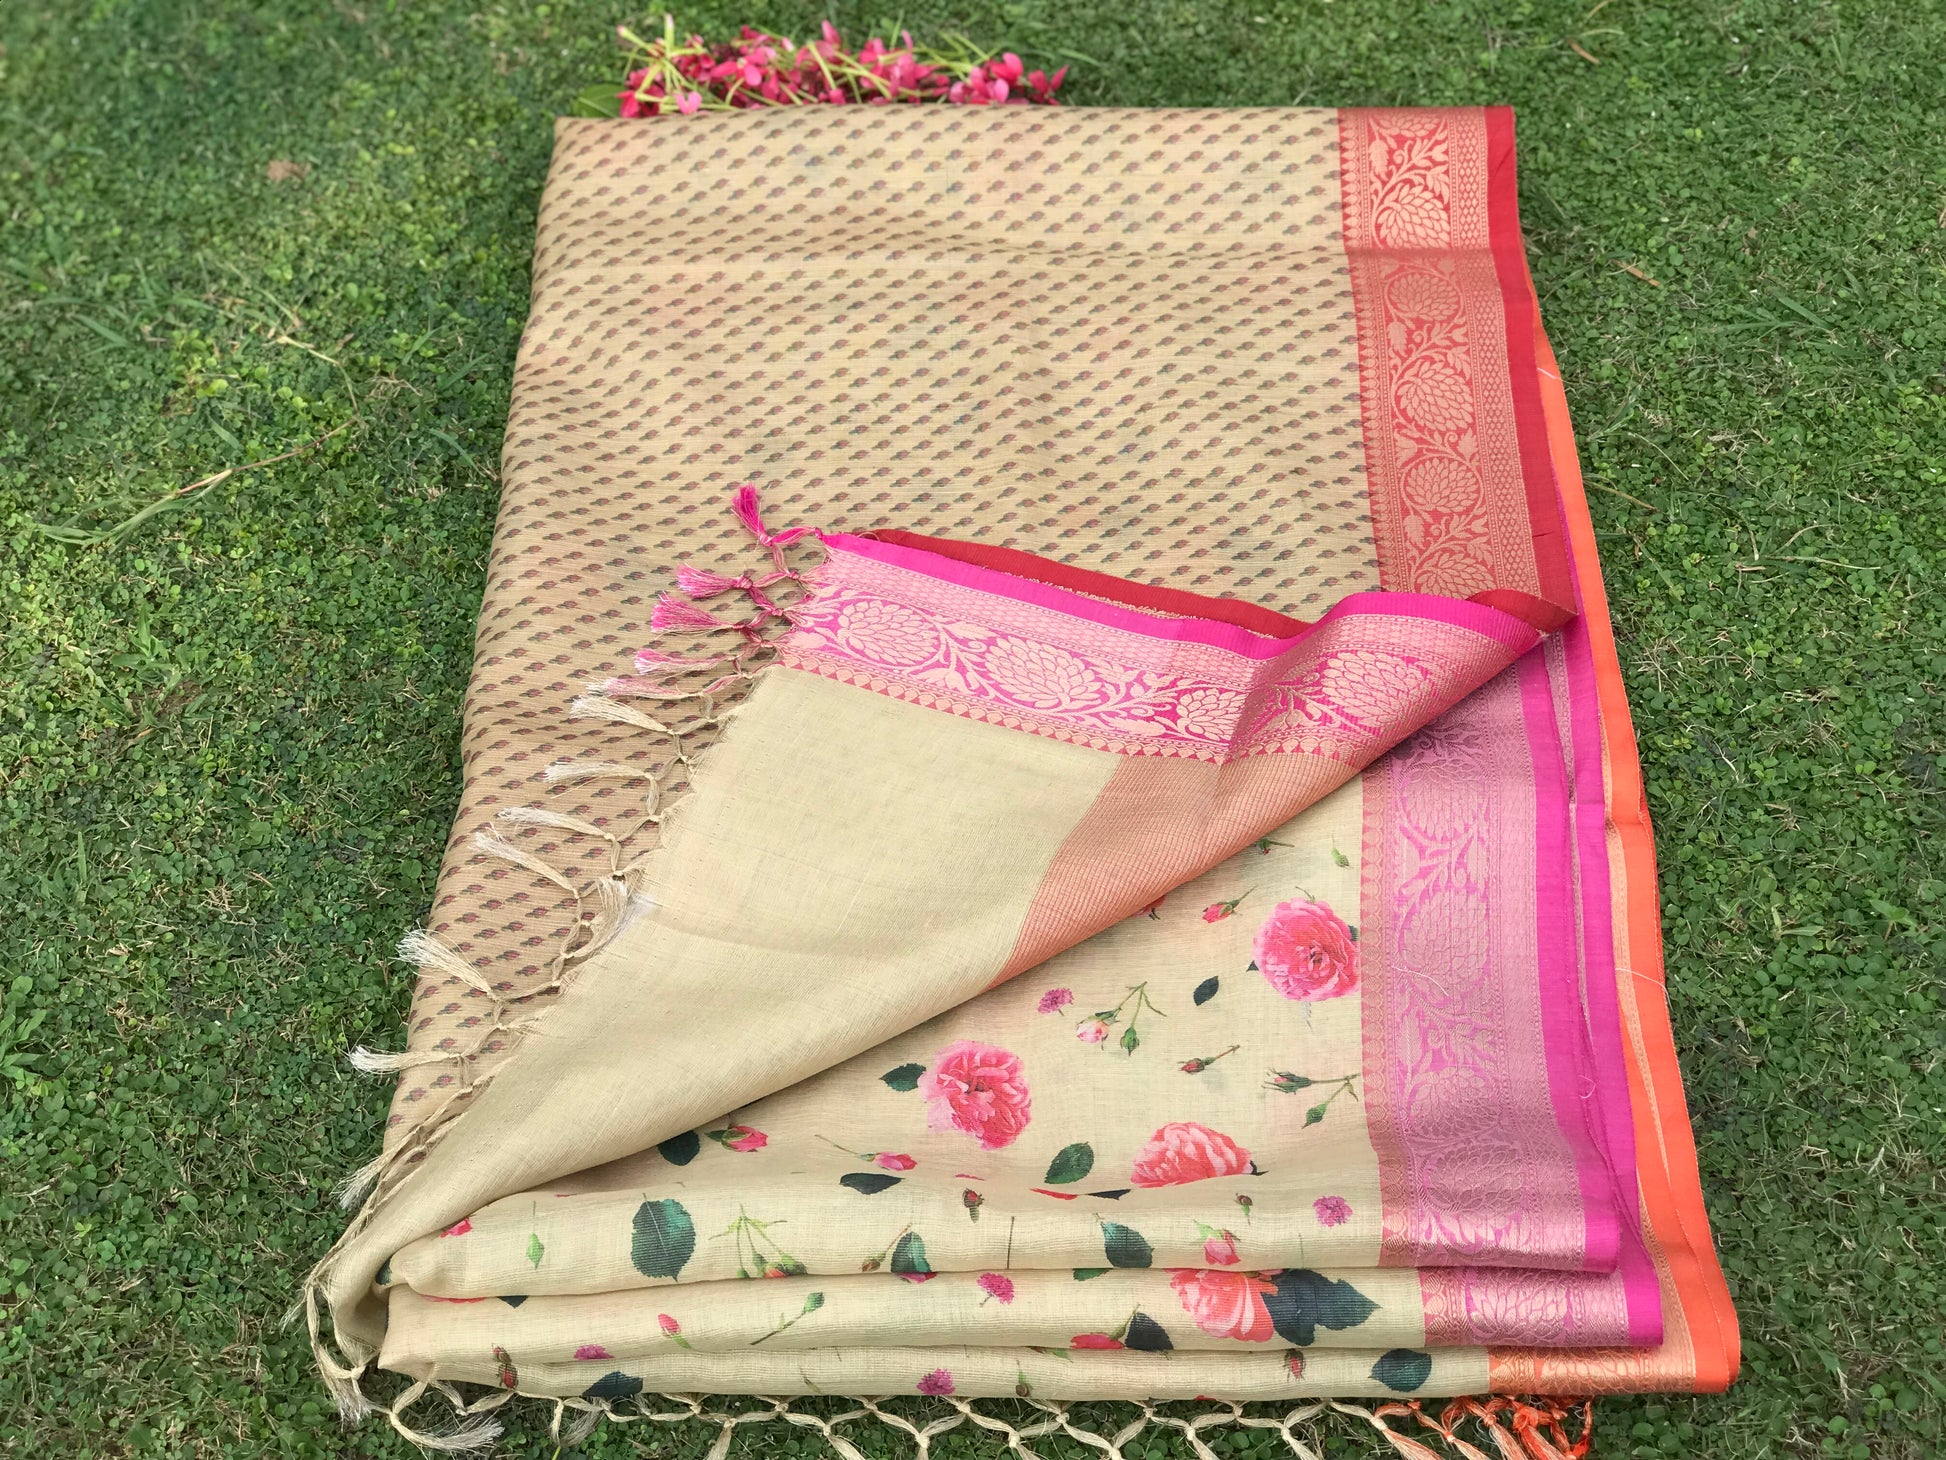 Image of Elegant and Traditional Pure Organza Silk Saree. The Source India is an Indian Handicraft, Home Decor, Furnishing and Textiles Store. Based out of Hauz Khas Village New Delhi, each piece is carefully procured to allow the enhancement of India's Culture. 